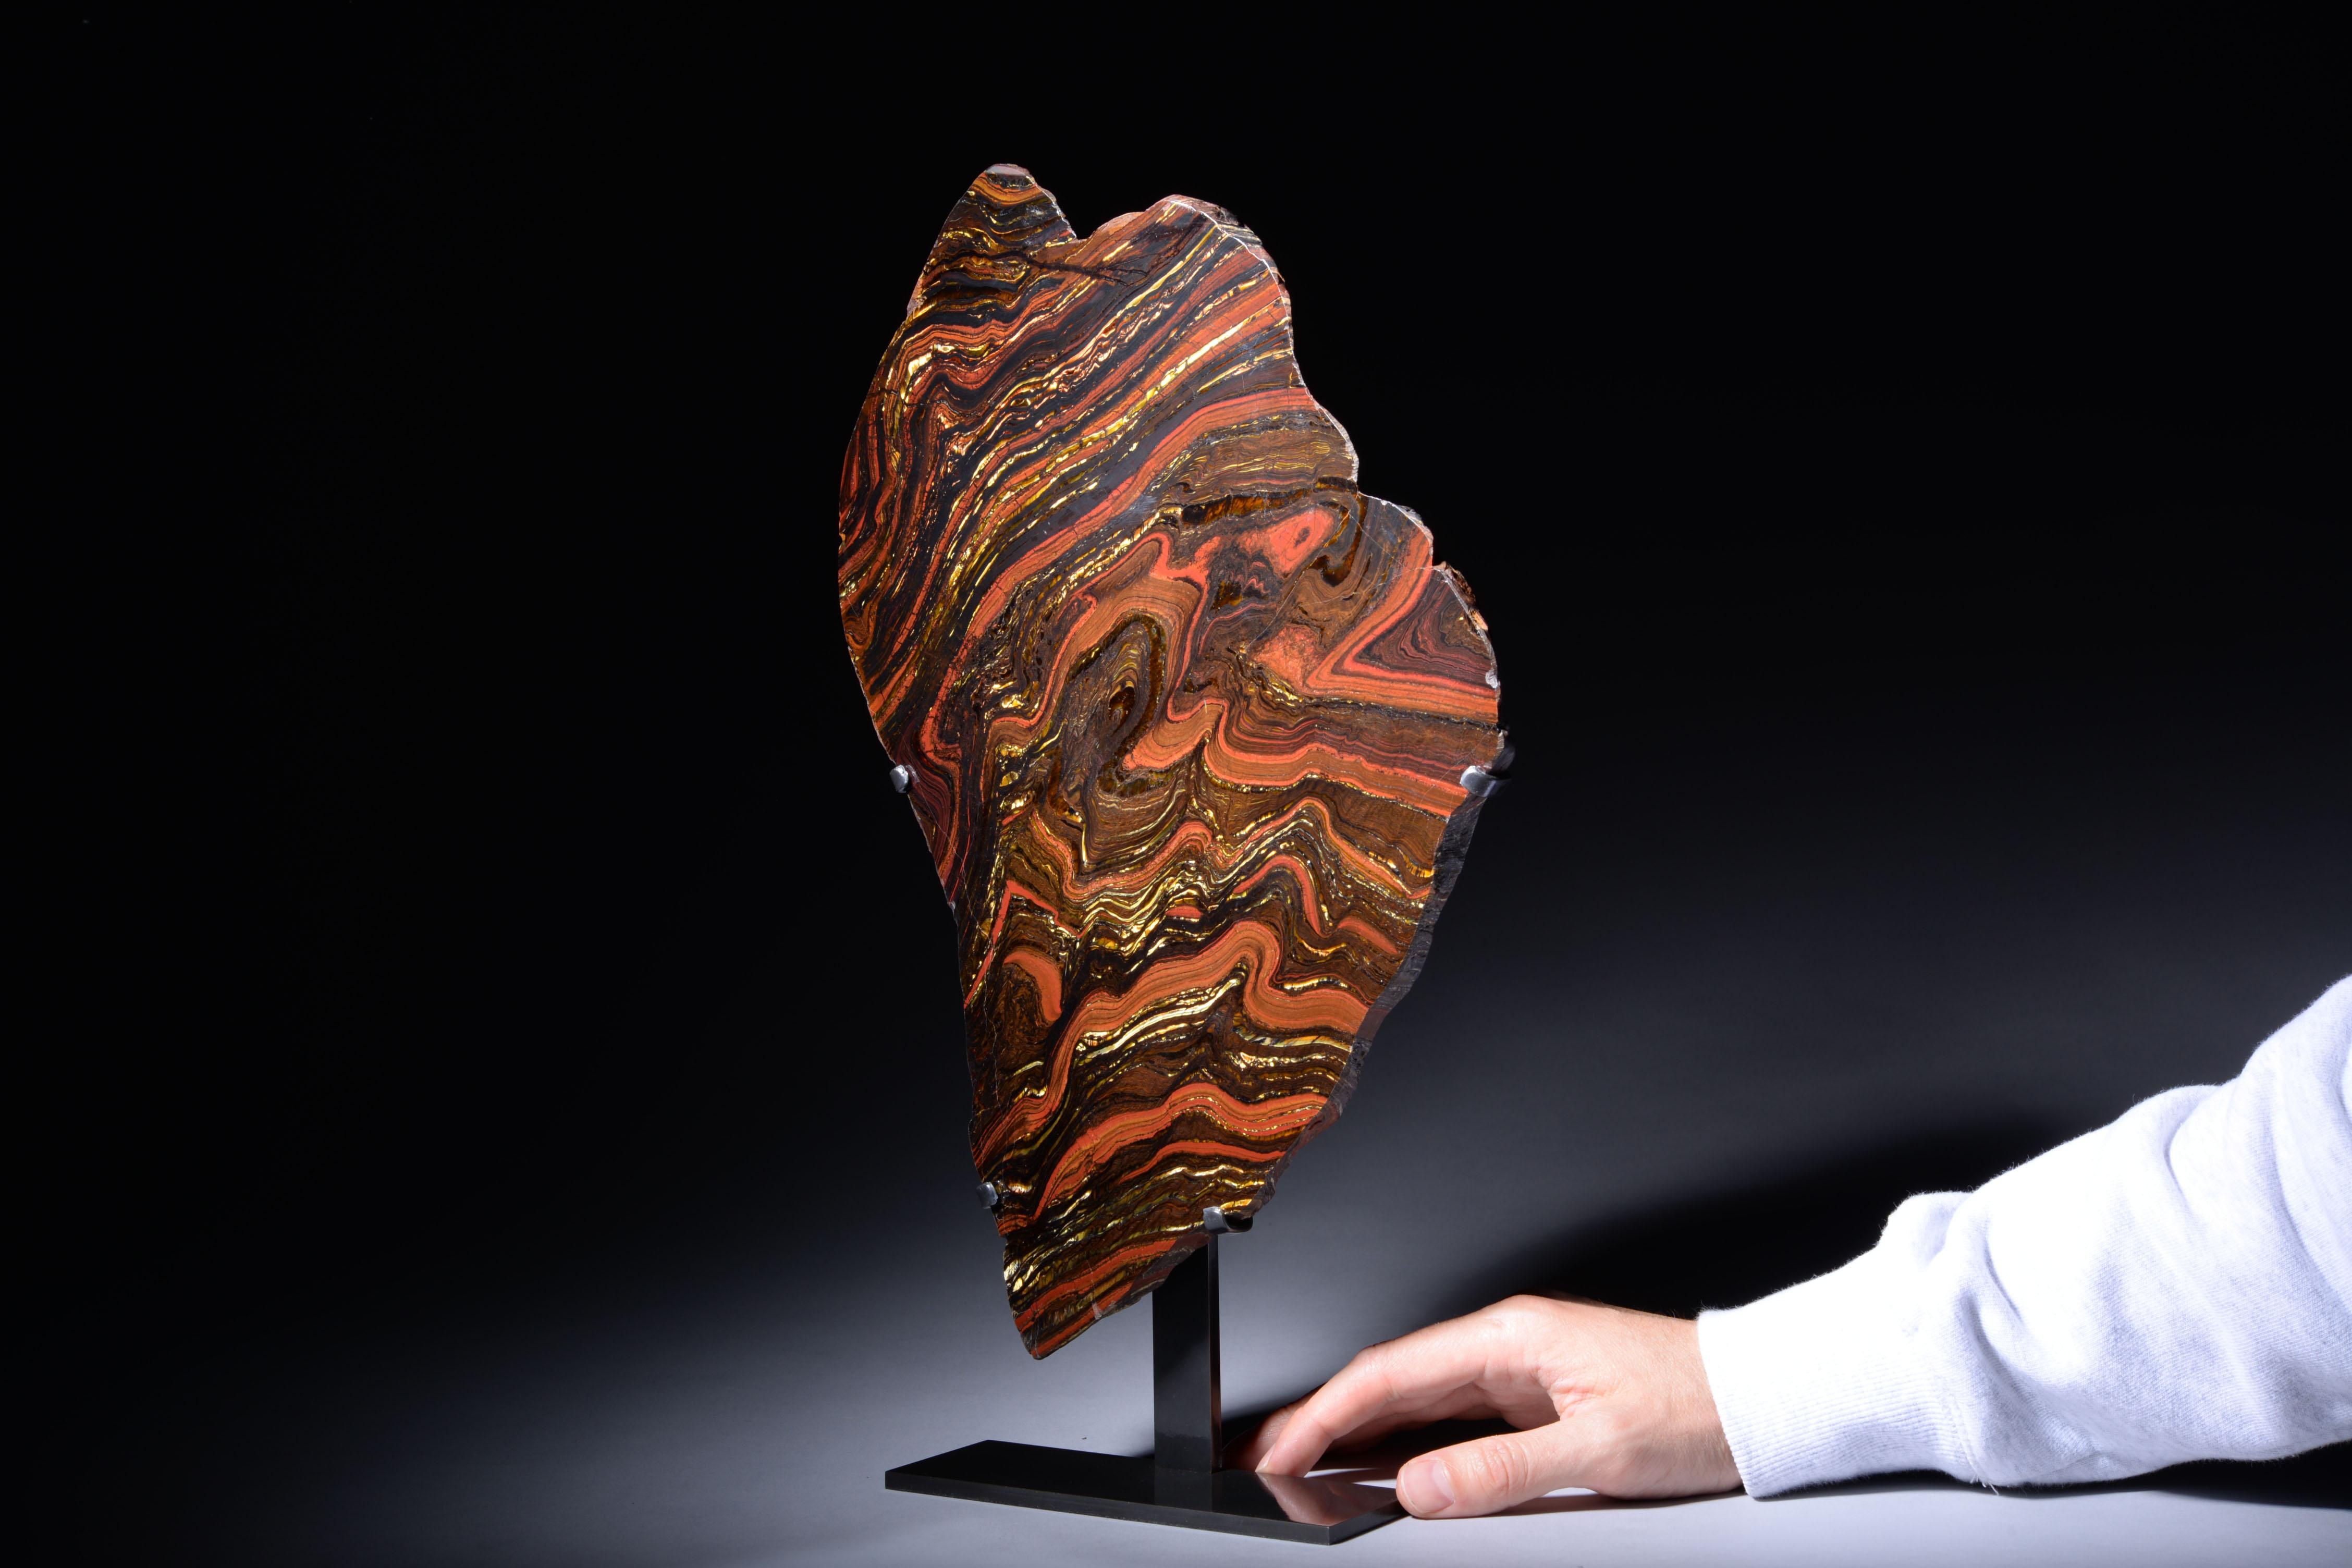 banded iron formation for sale